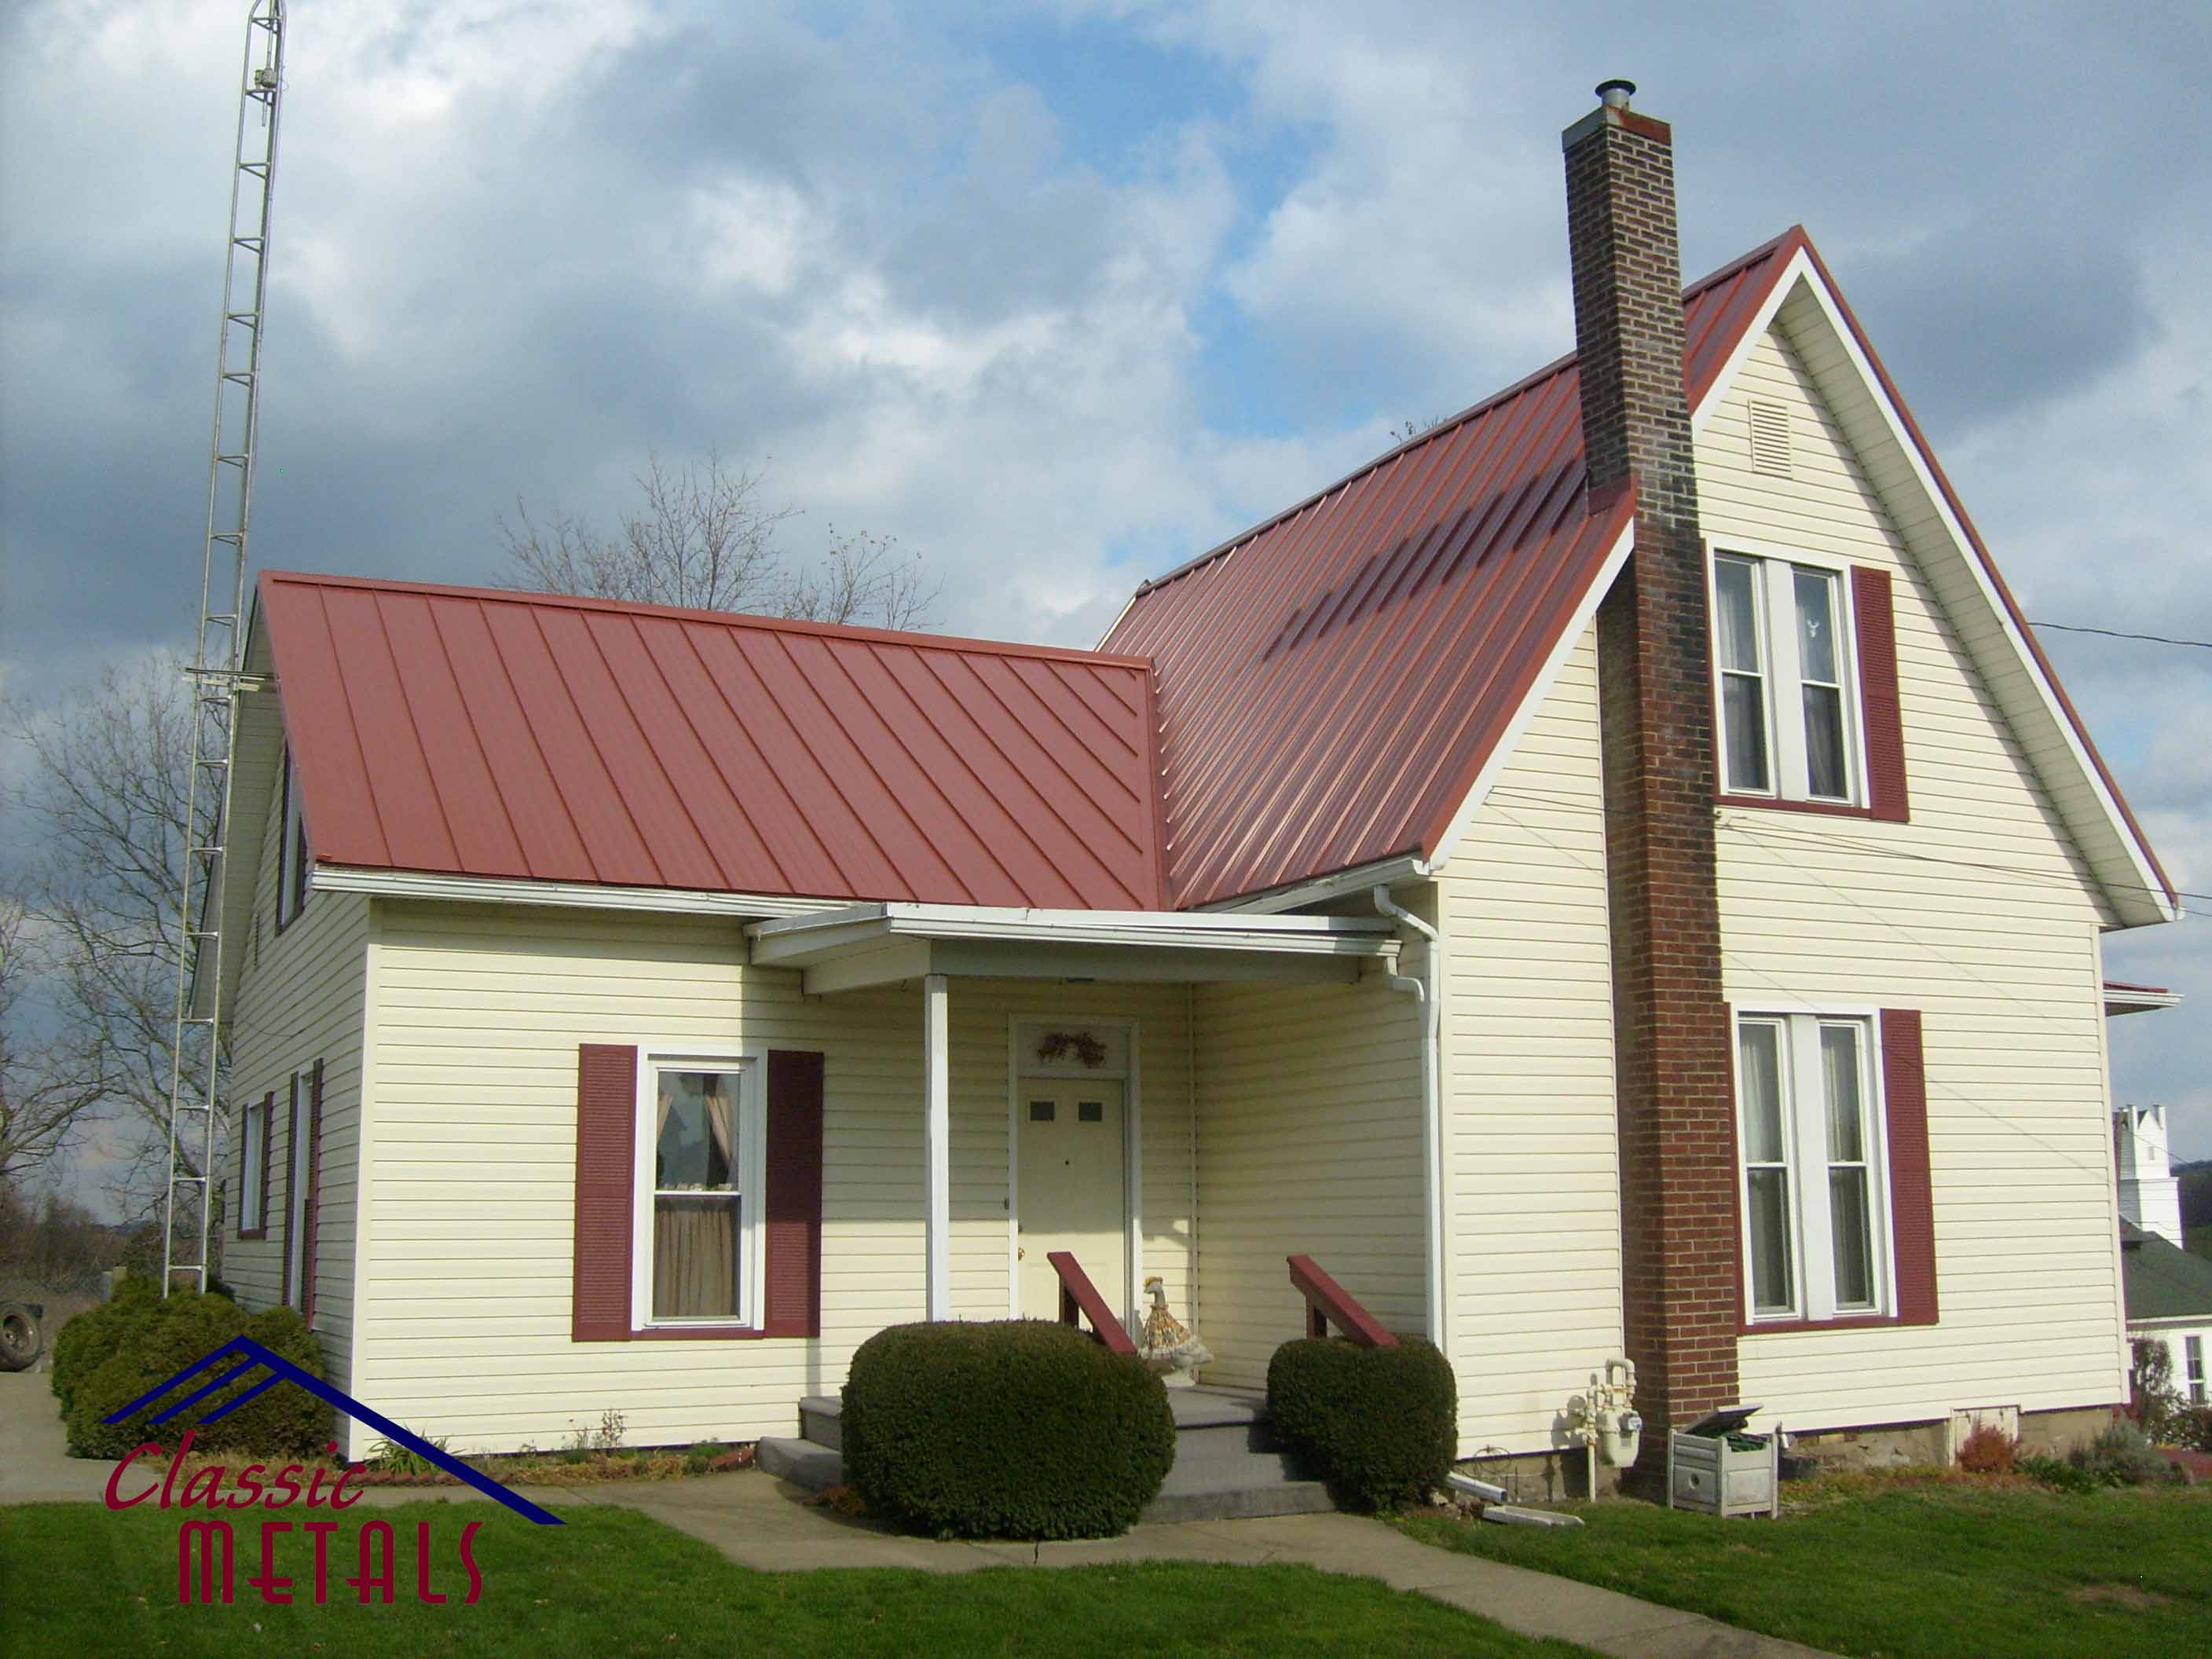 Weatherlock Plus Classic Metals Quality Metal Roofing and Siding.